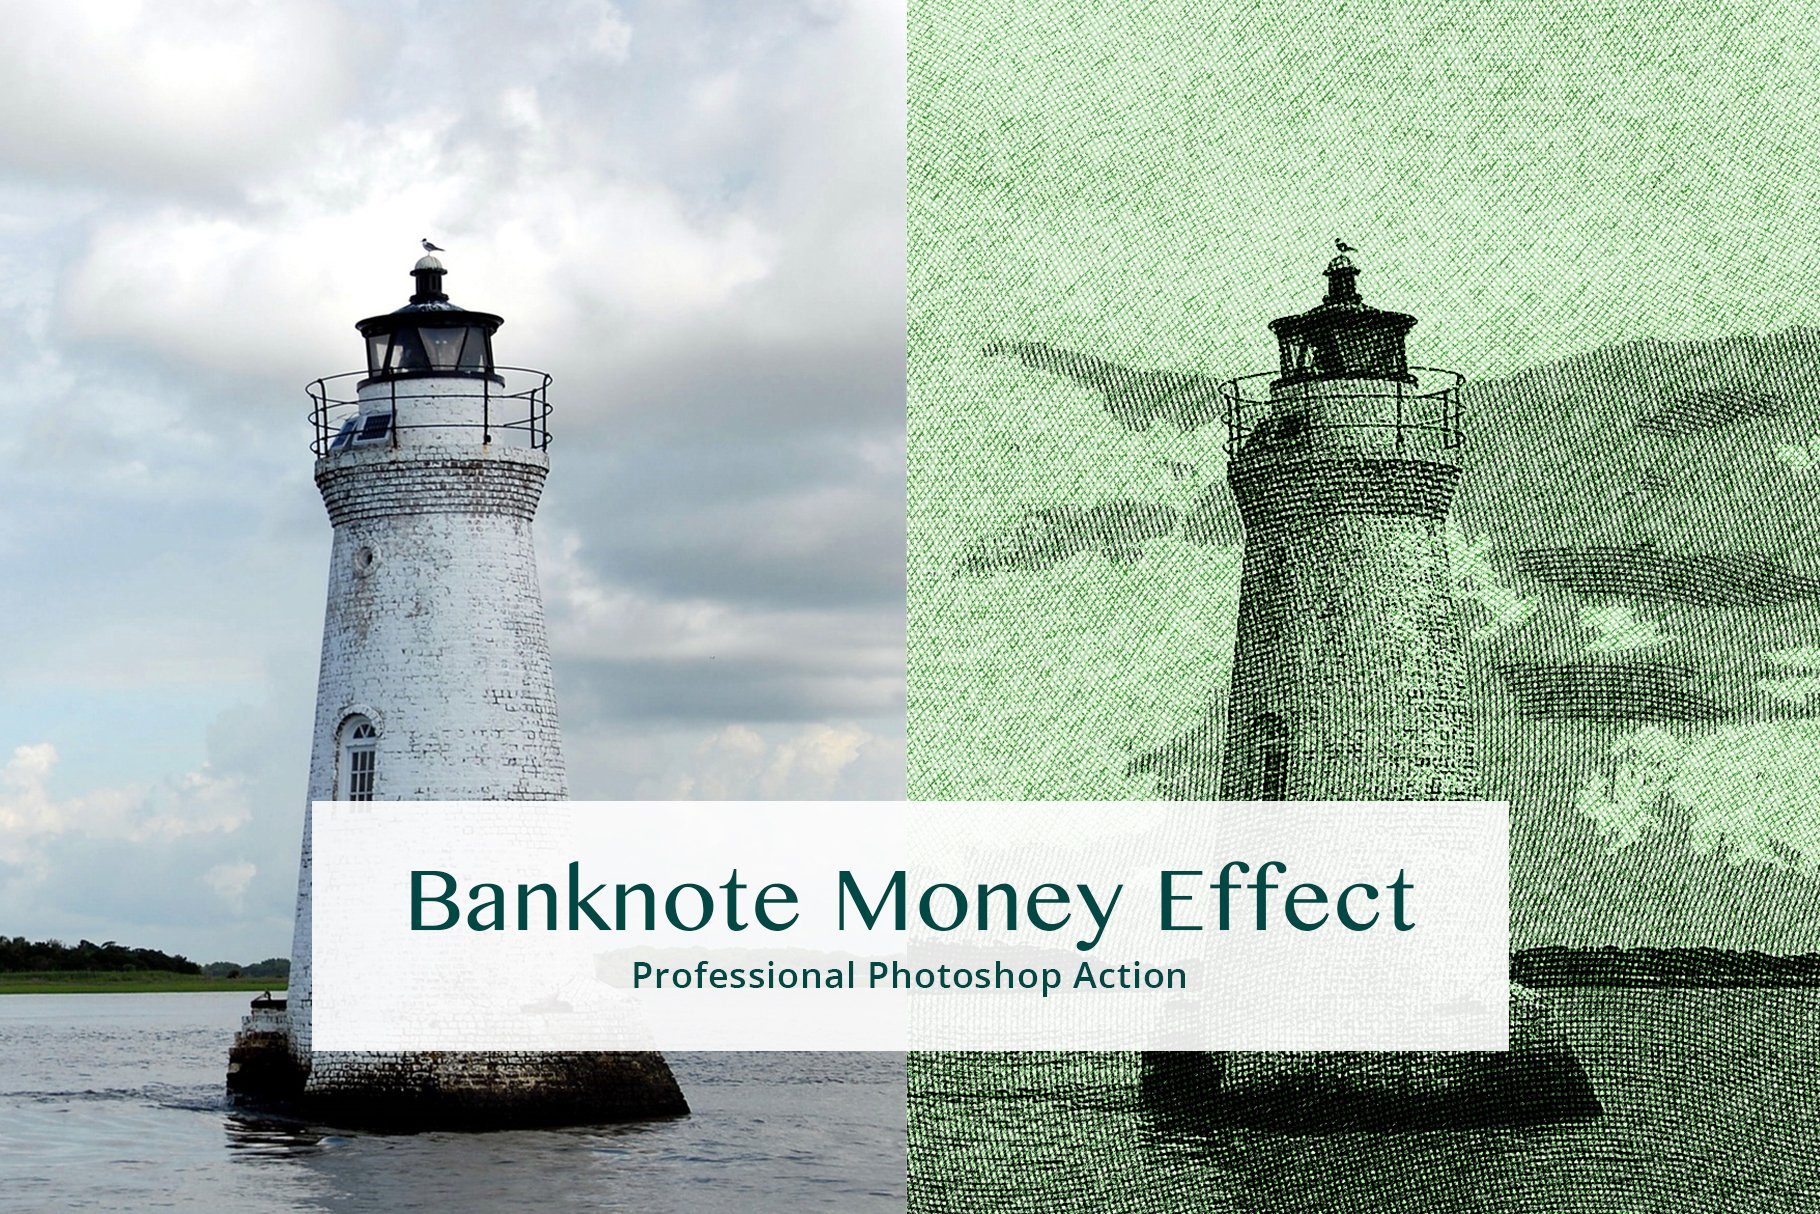 Banknote Money Effectcover image.